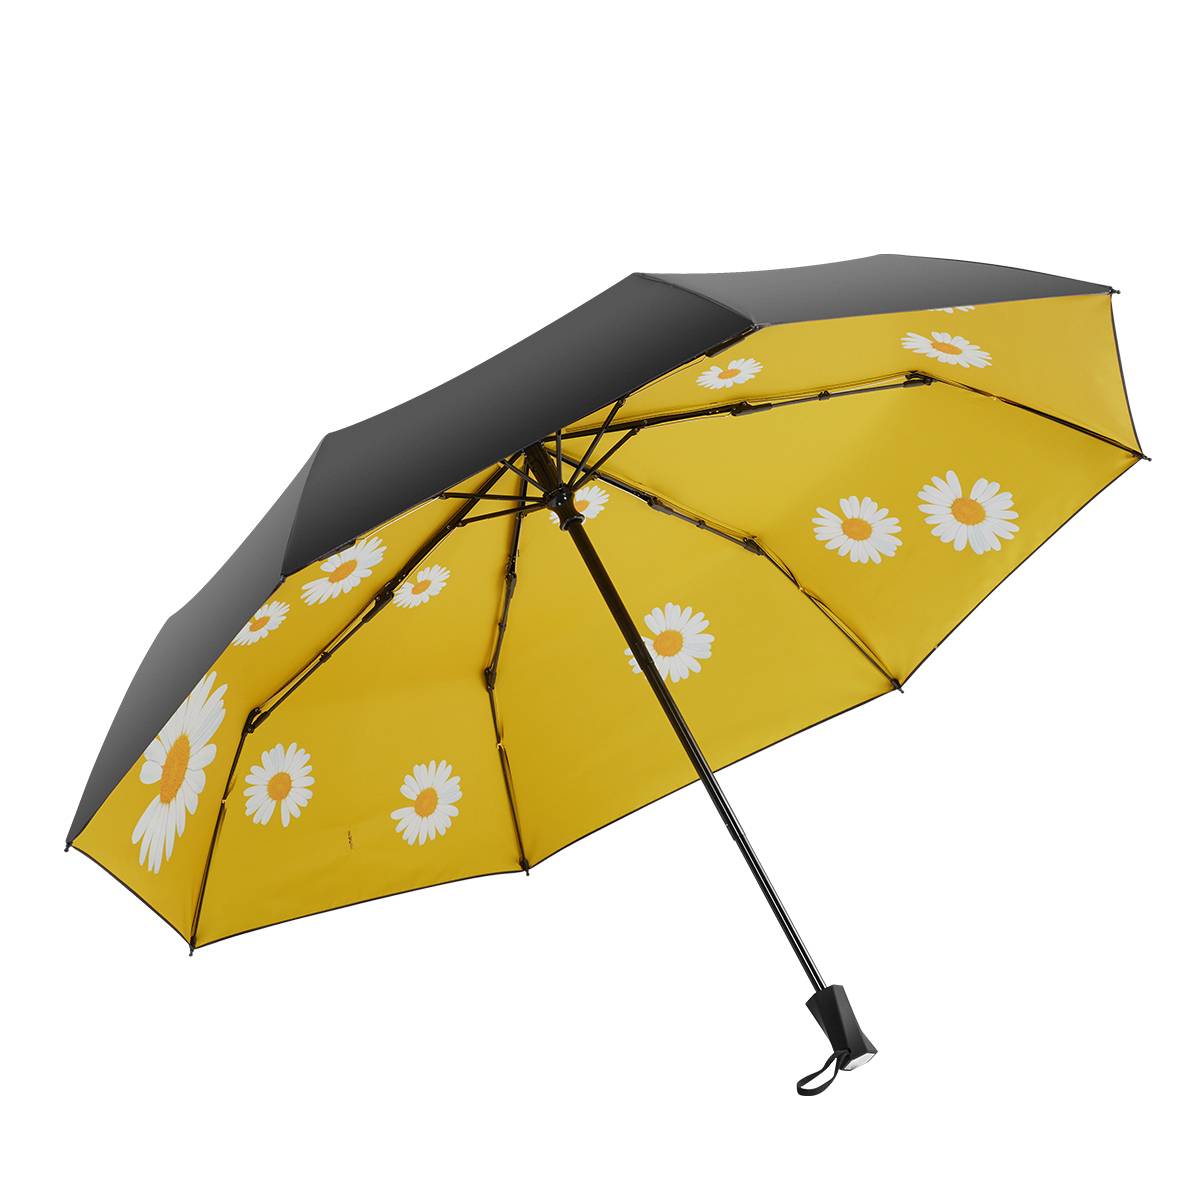 Factory wholesale Umbrella With Stand - 21 inch 8 ribs manual open unique handle design with daisy flower 3 fold umbrella – DongFangZhanXin